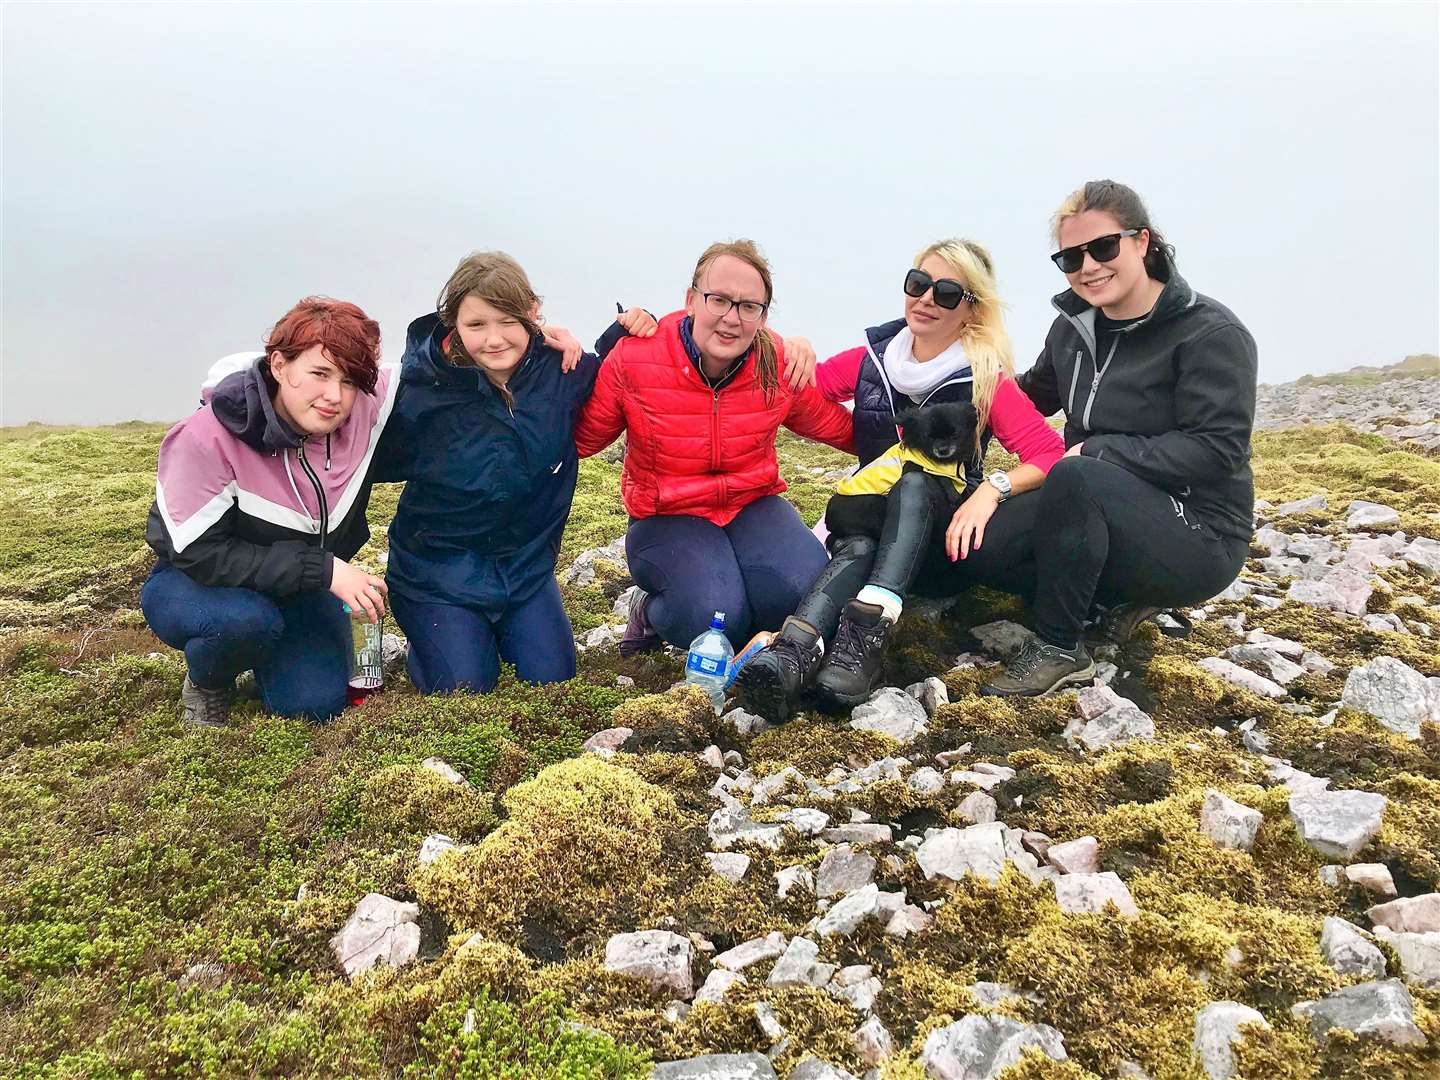 Stable owner Natalie Oag often takes her students on team building exercises such as this climb to the summit of Scaraben. From left, Sophie Bell, Gina Lewis, Eleanor Hargrave, Natalie Oag with her dog Louis and Sophie Morgan.